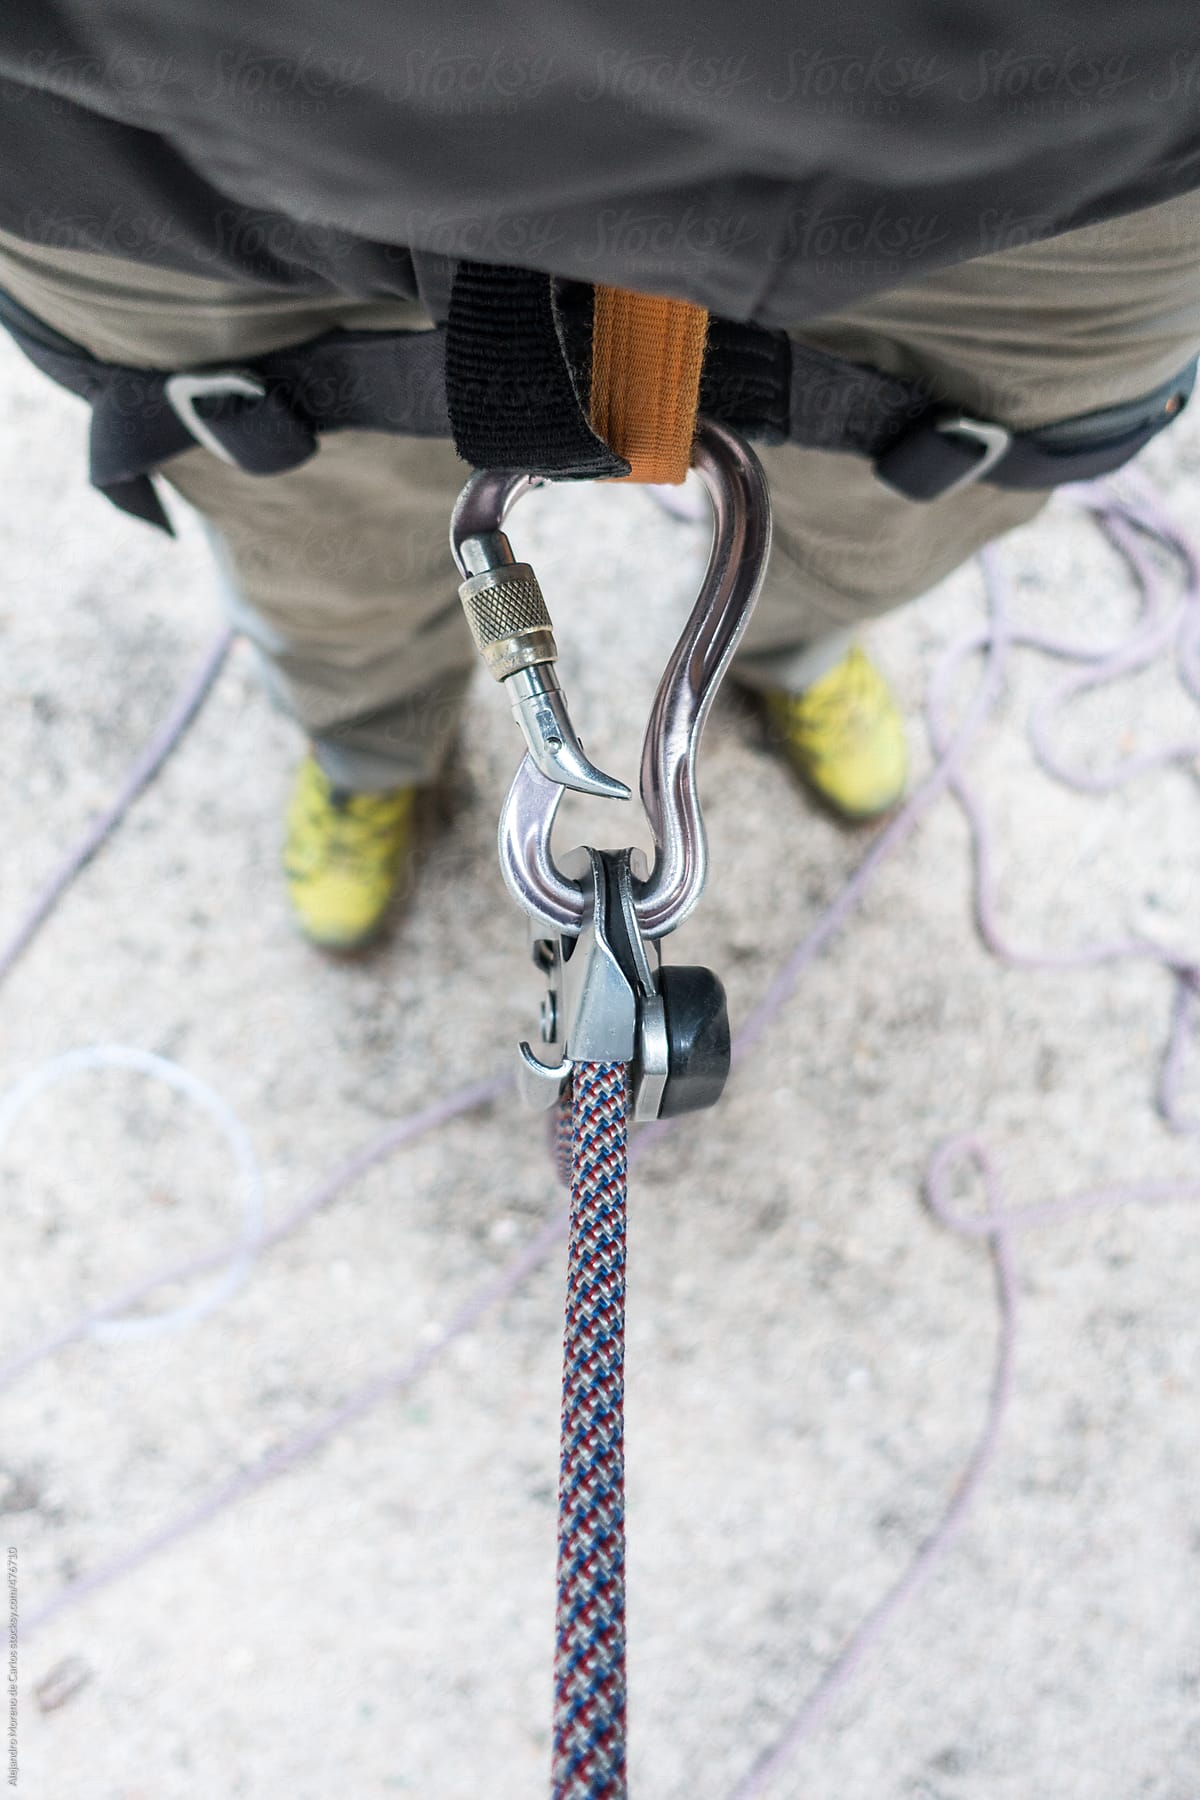 POV view of a man belaying in rock climbing